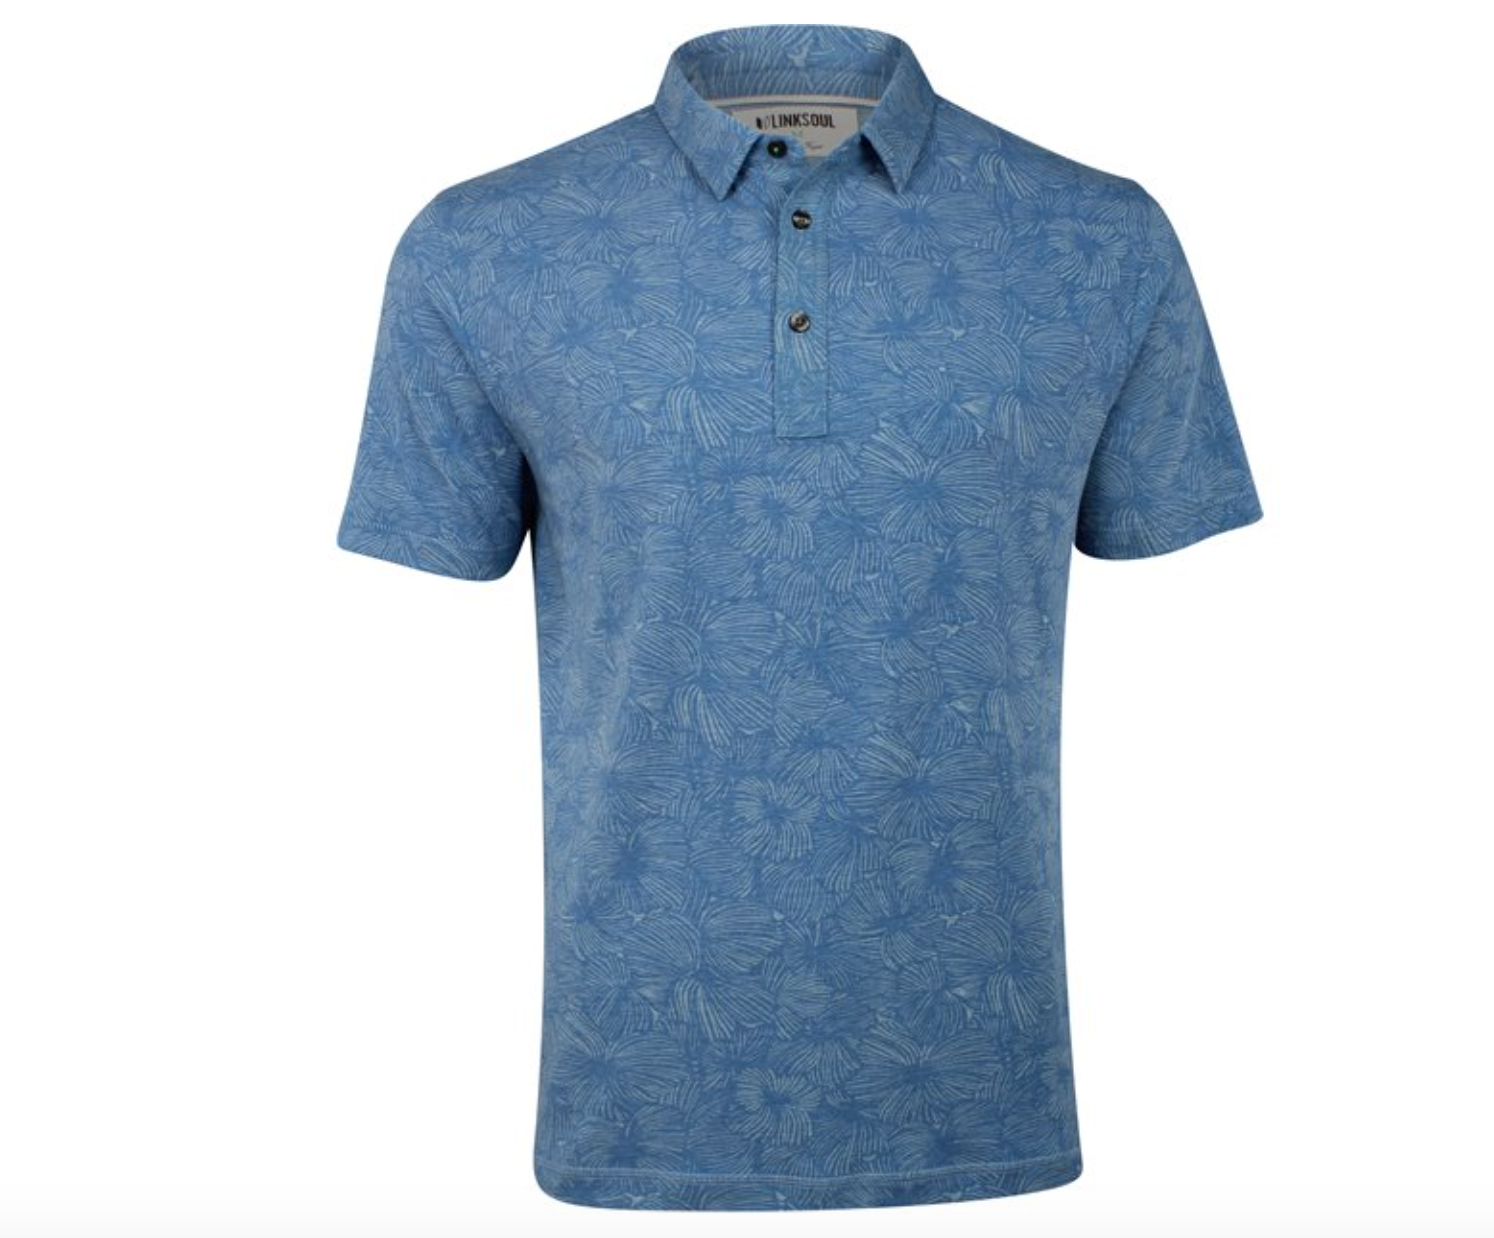 Deal of the week: We love these Linksoul T-shirts featuring Ben Hogan